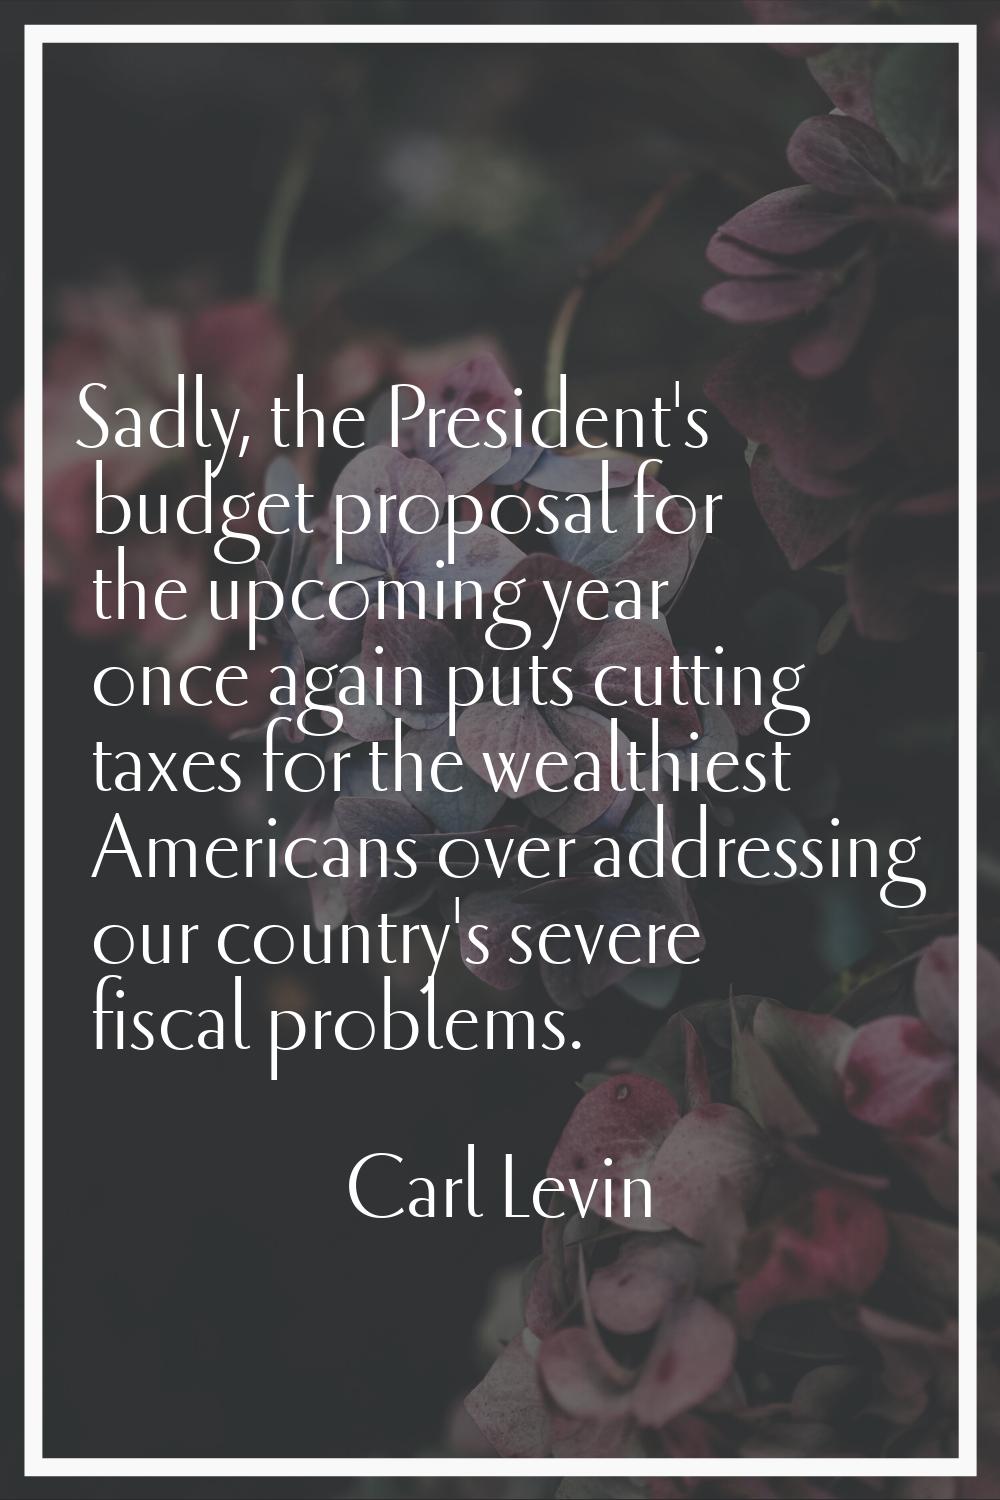 Sadly, the President's budget proposal for the upcoming year once again puts cutting taxes for the 